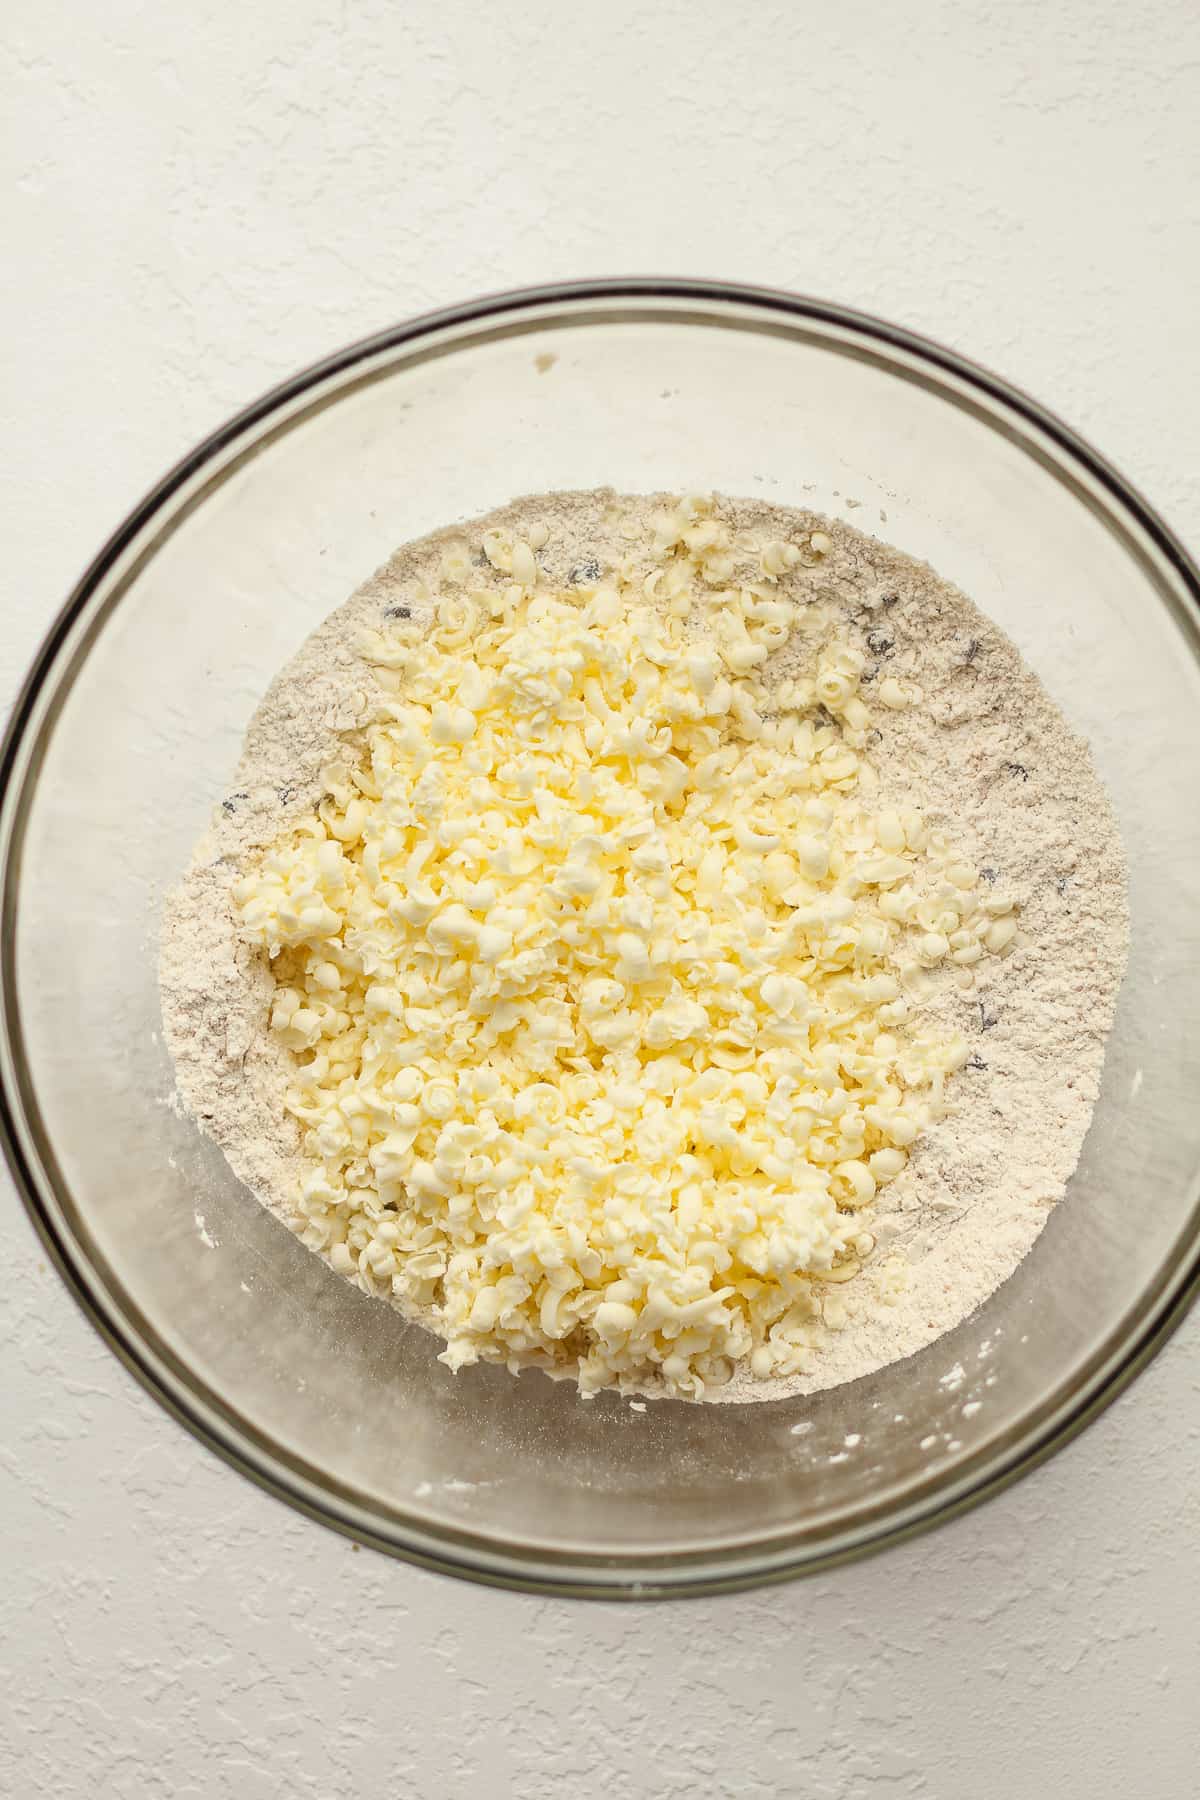 The dry scone ingredients with the grated butter on top.